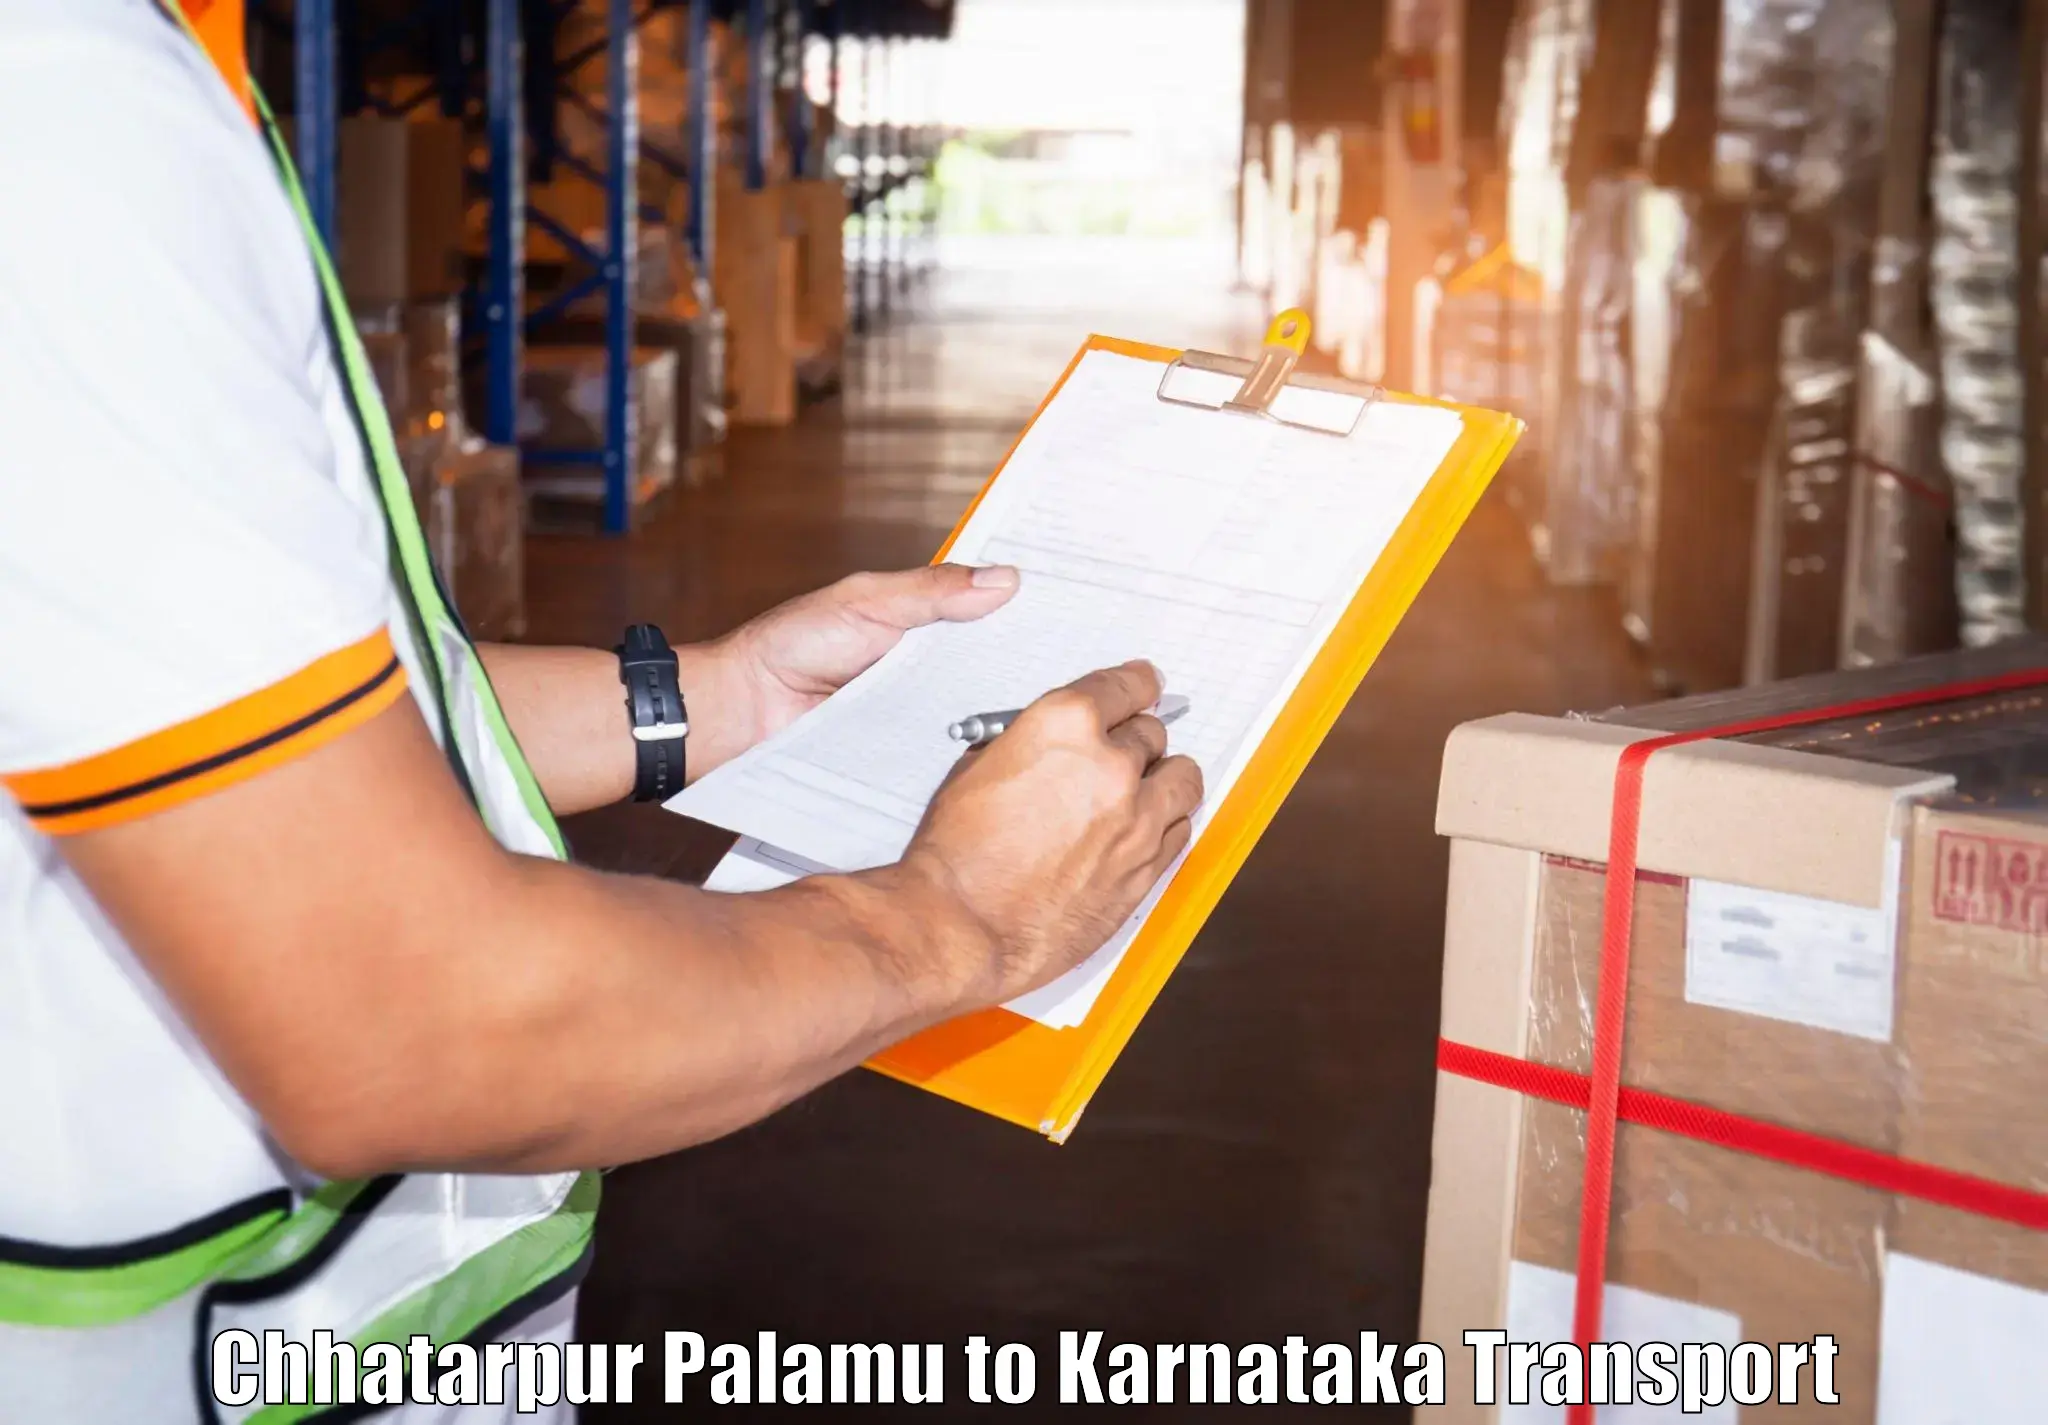 Parcel transport services in Chhatarpur Palamu to Belthangady